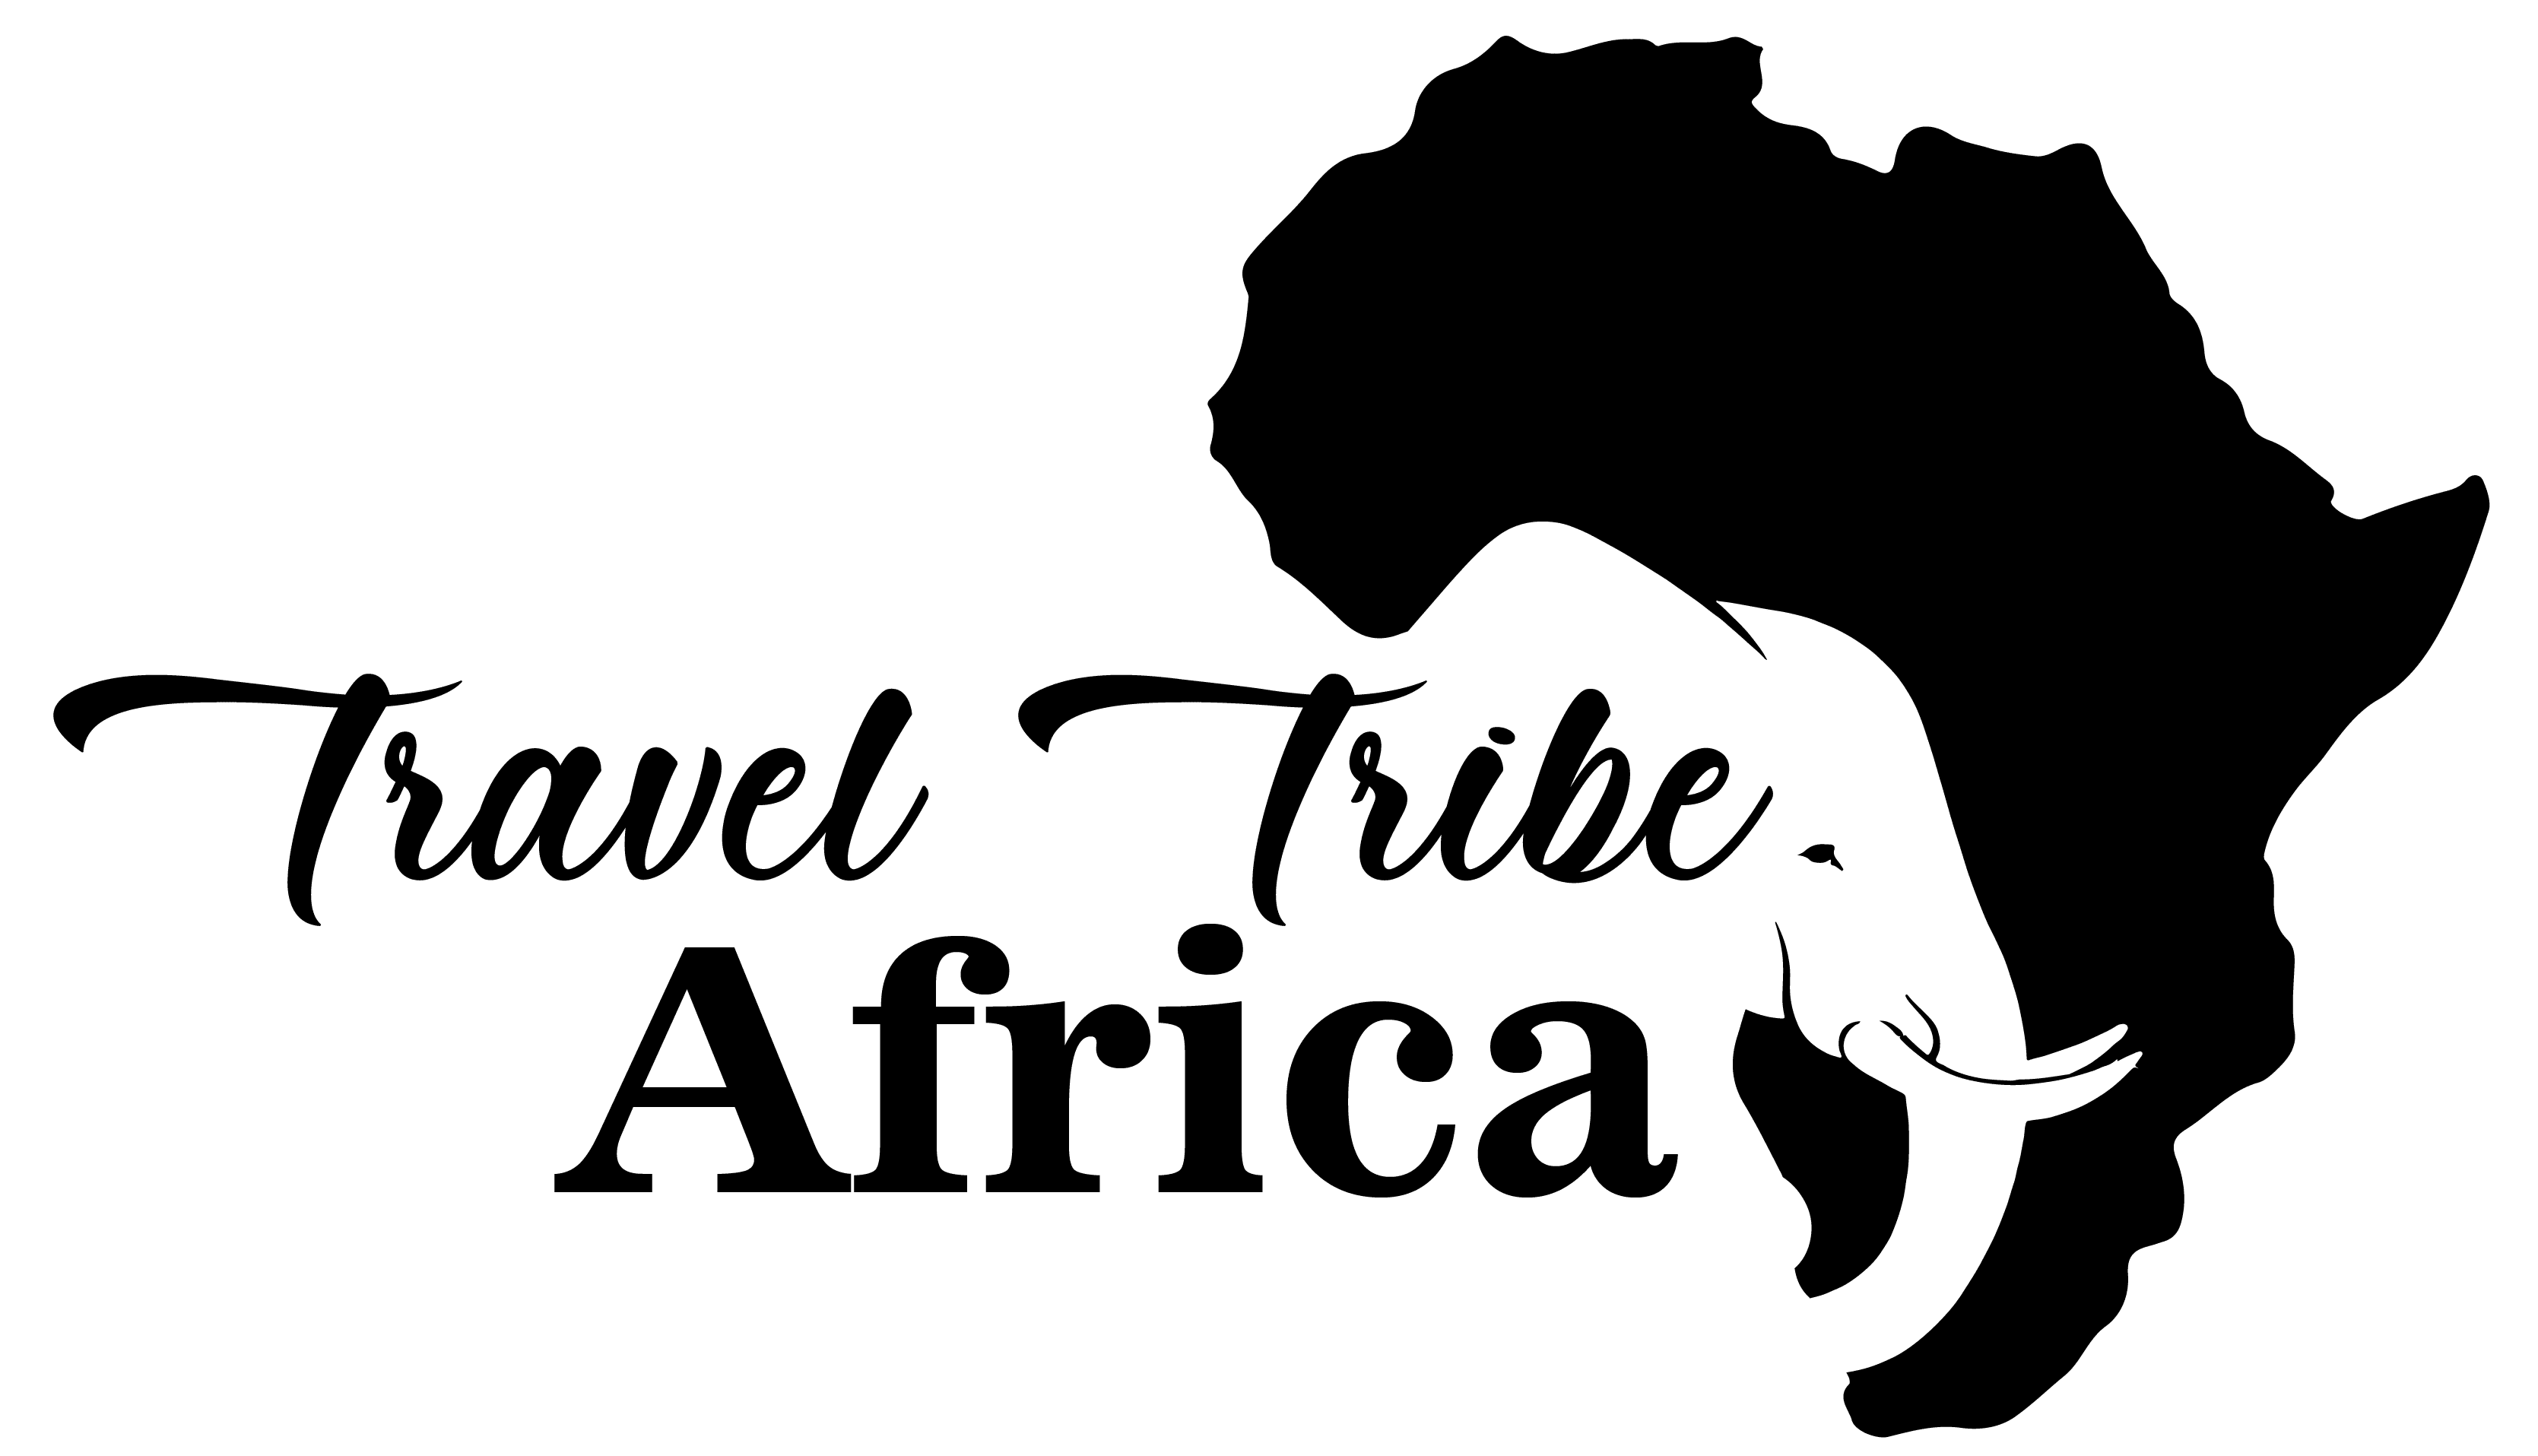 Travel Tribe Africa